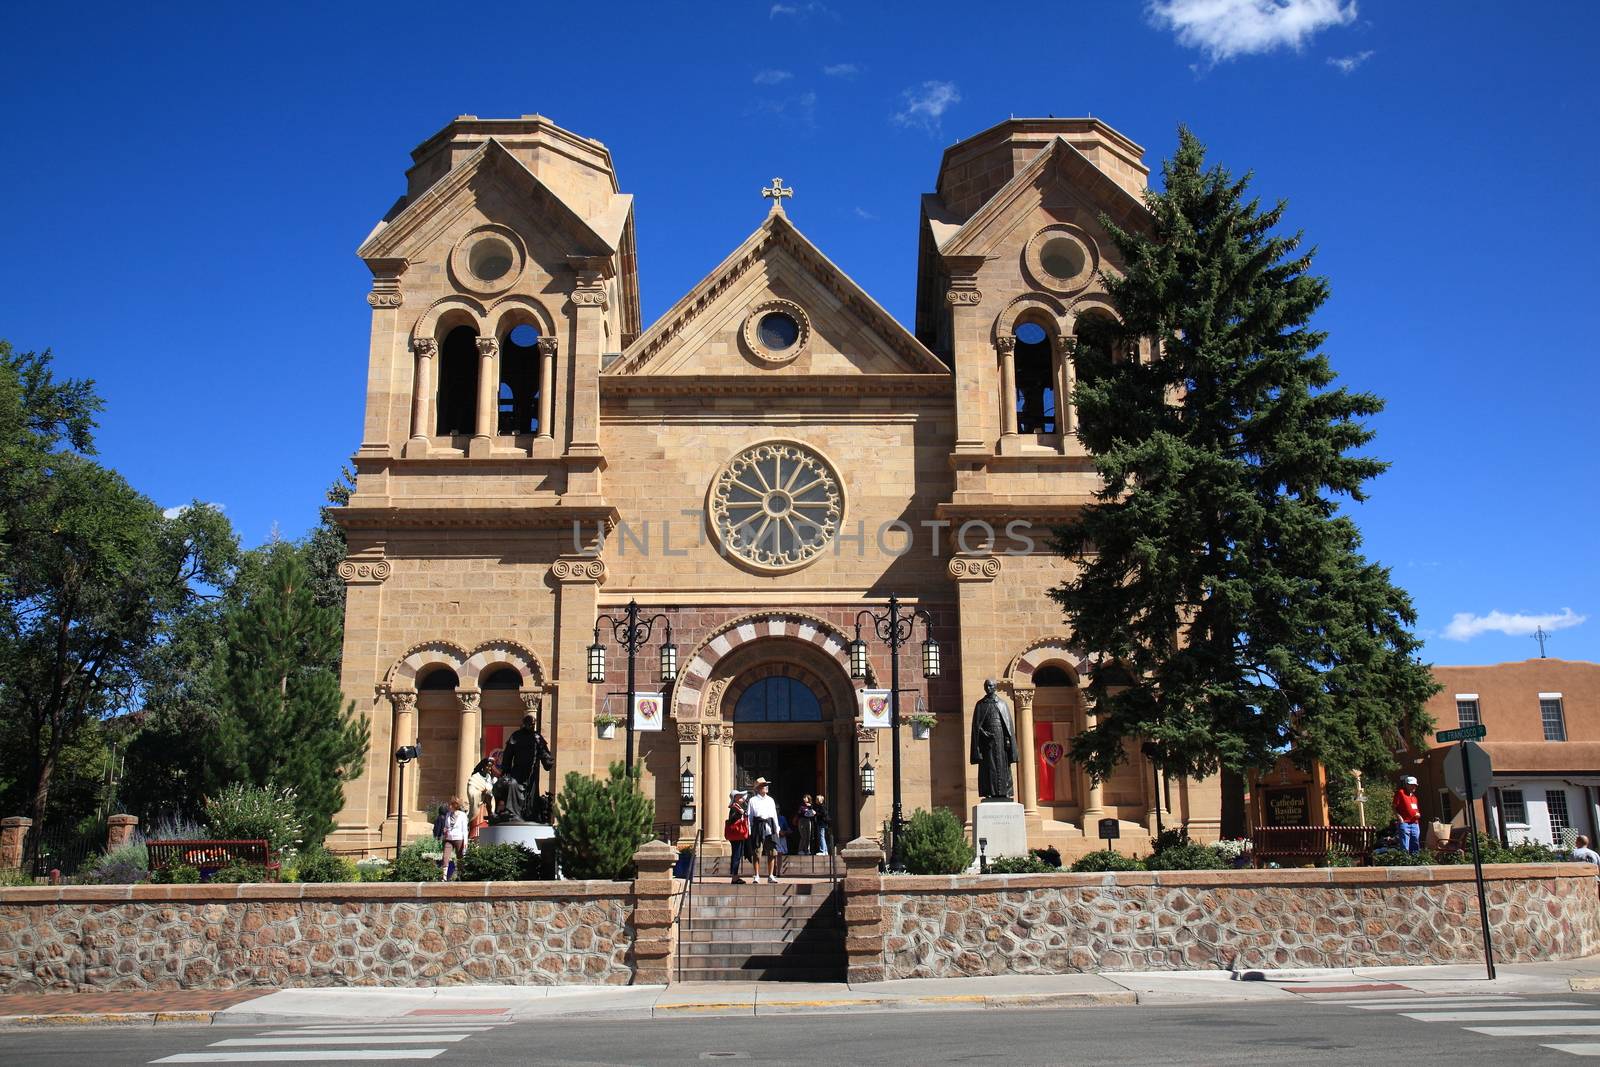 Basilica of St. Francis of Assisi, a Santa Fe, New Mexico, landmark built in the 1800's.